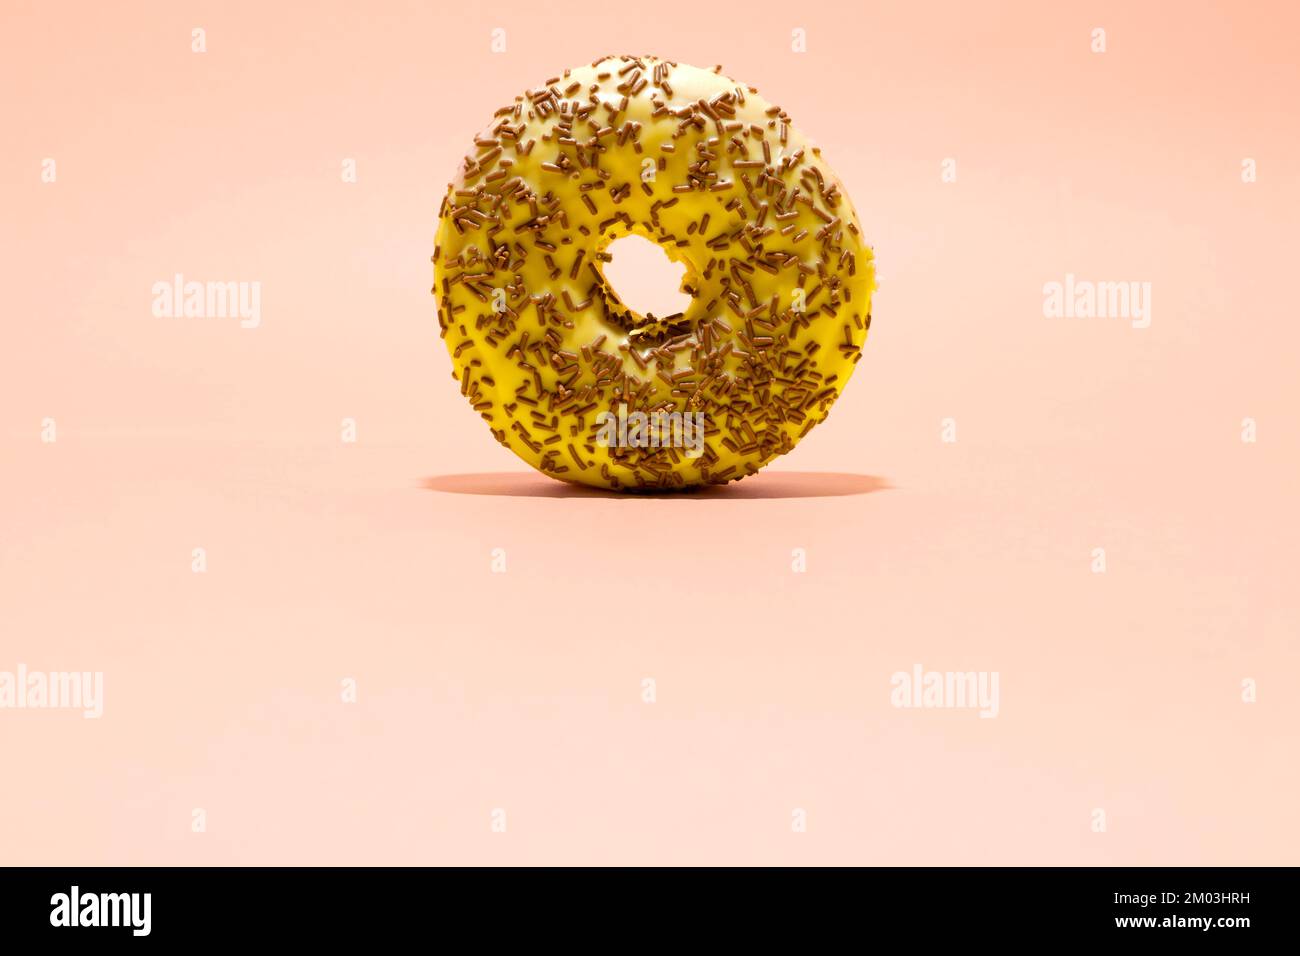 Yellow donut with chocolate crumbs on light pink background. Creative food background Stock Photo